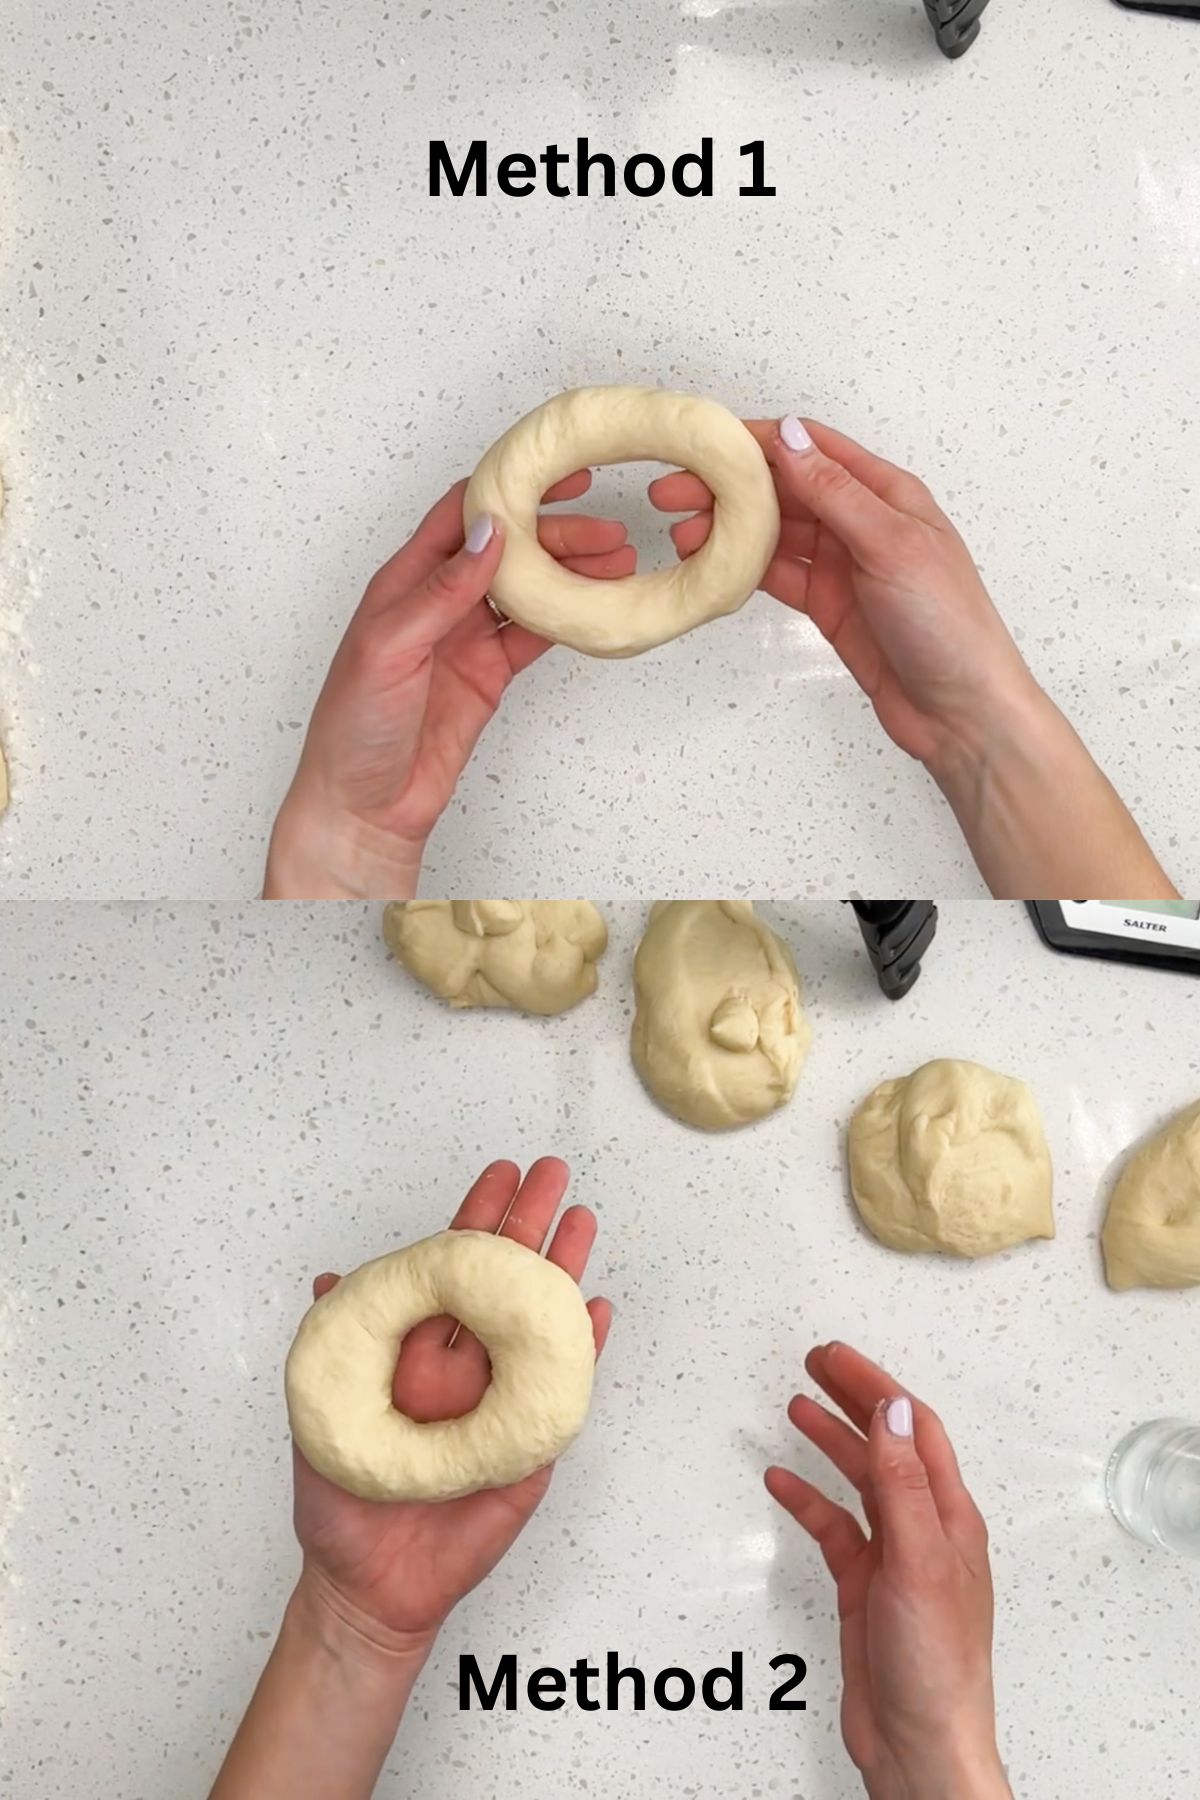 Showing the shape of the bagels for the two different methods of rolling them out.